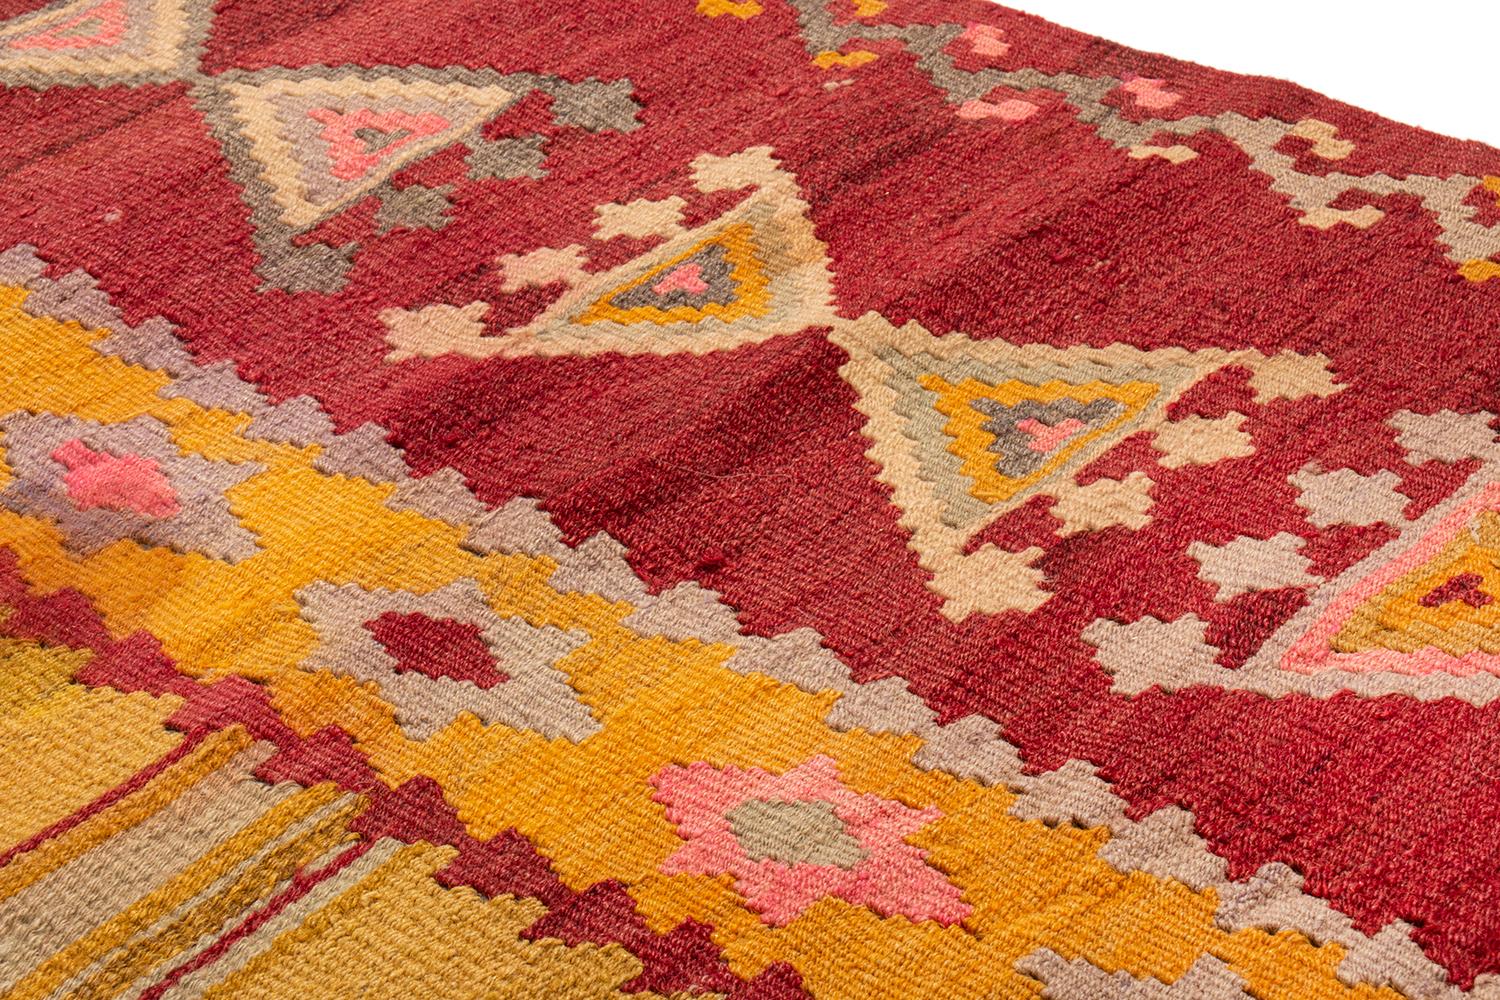 Antique Turkish Transitional Geometric Yellow Wool Kilim Rug by Rug & Kilim In Good Condition For Sale In Long Island City, NY